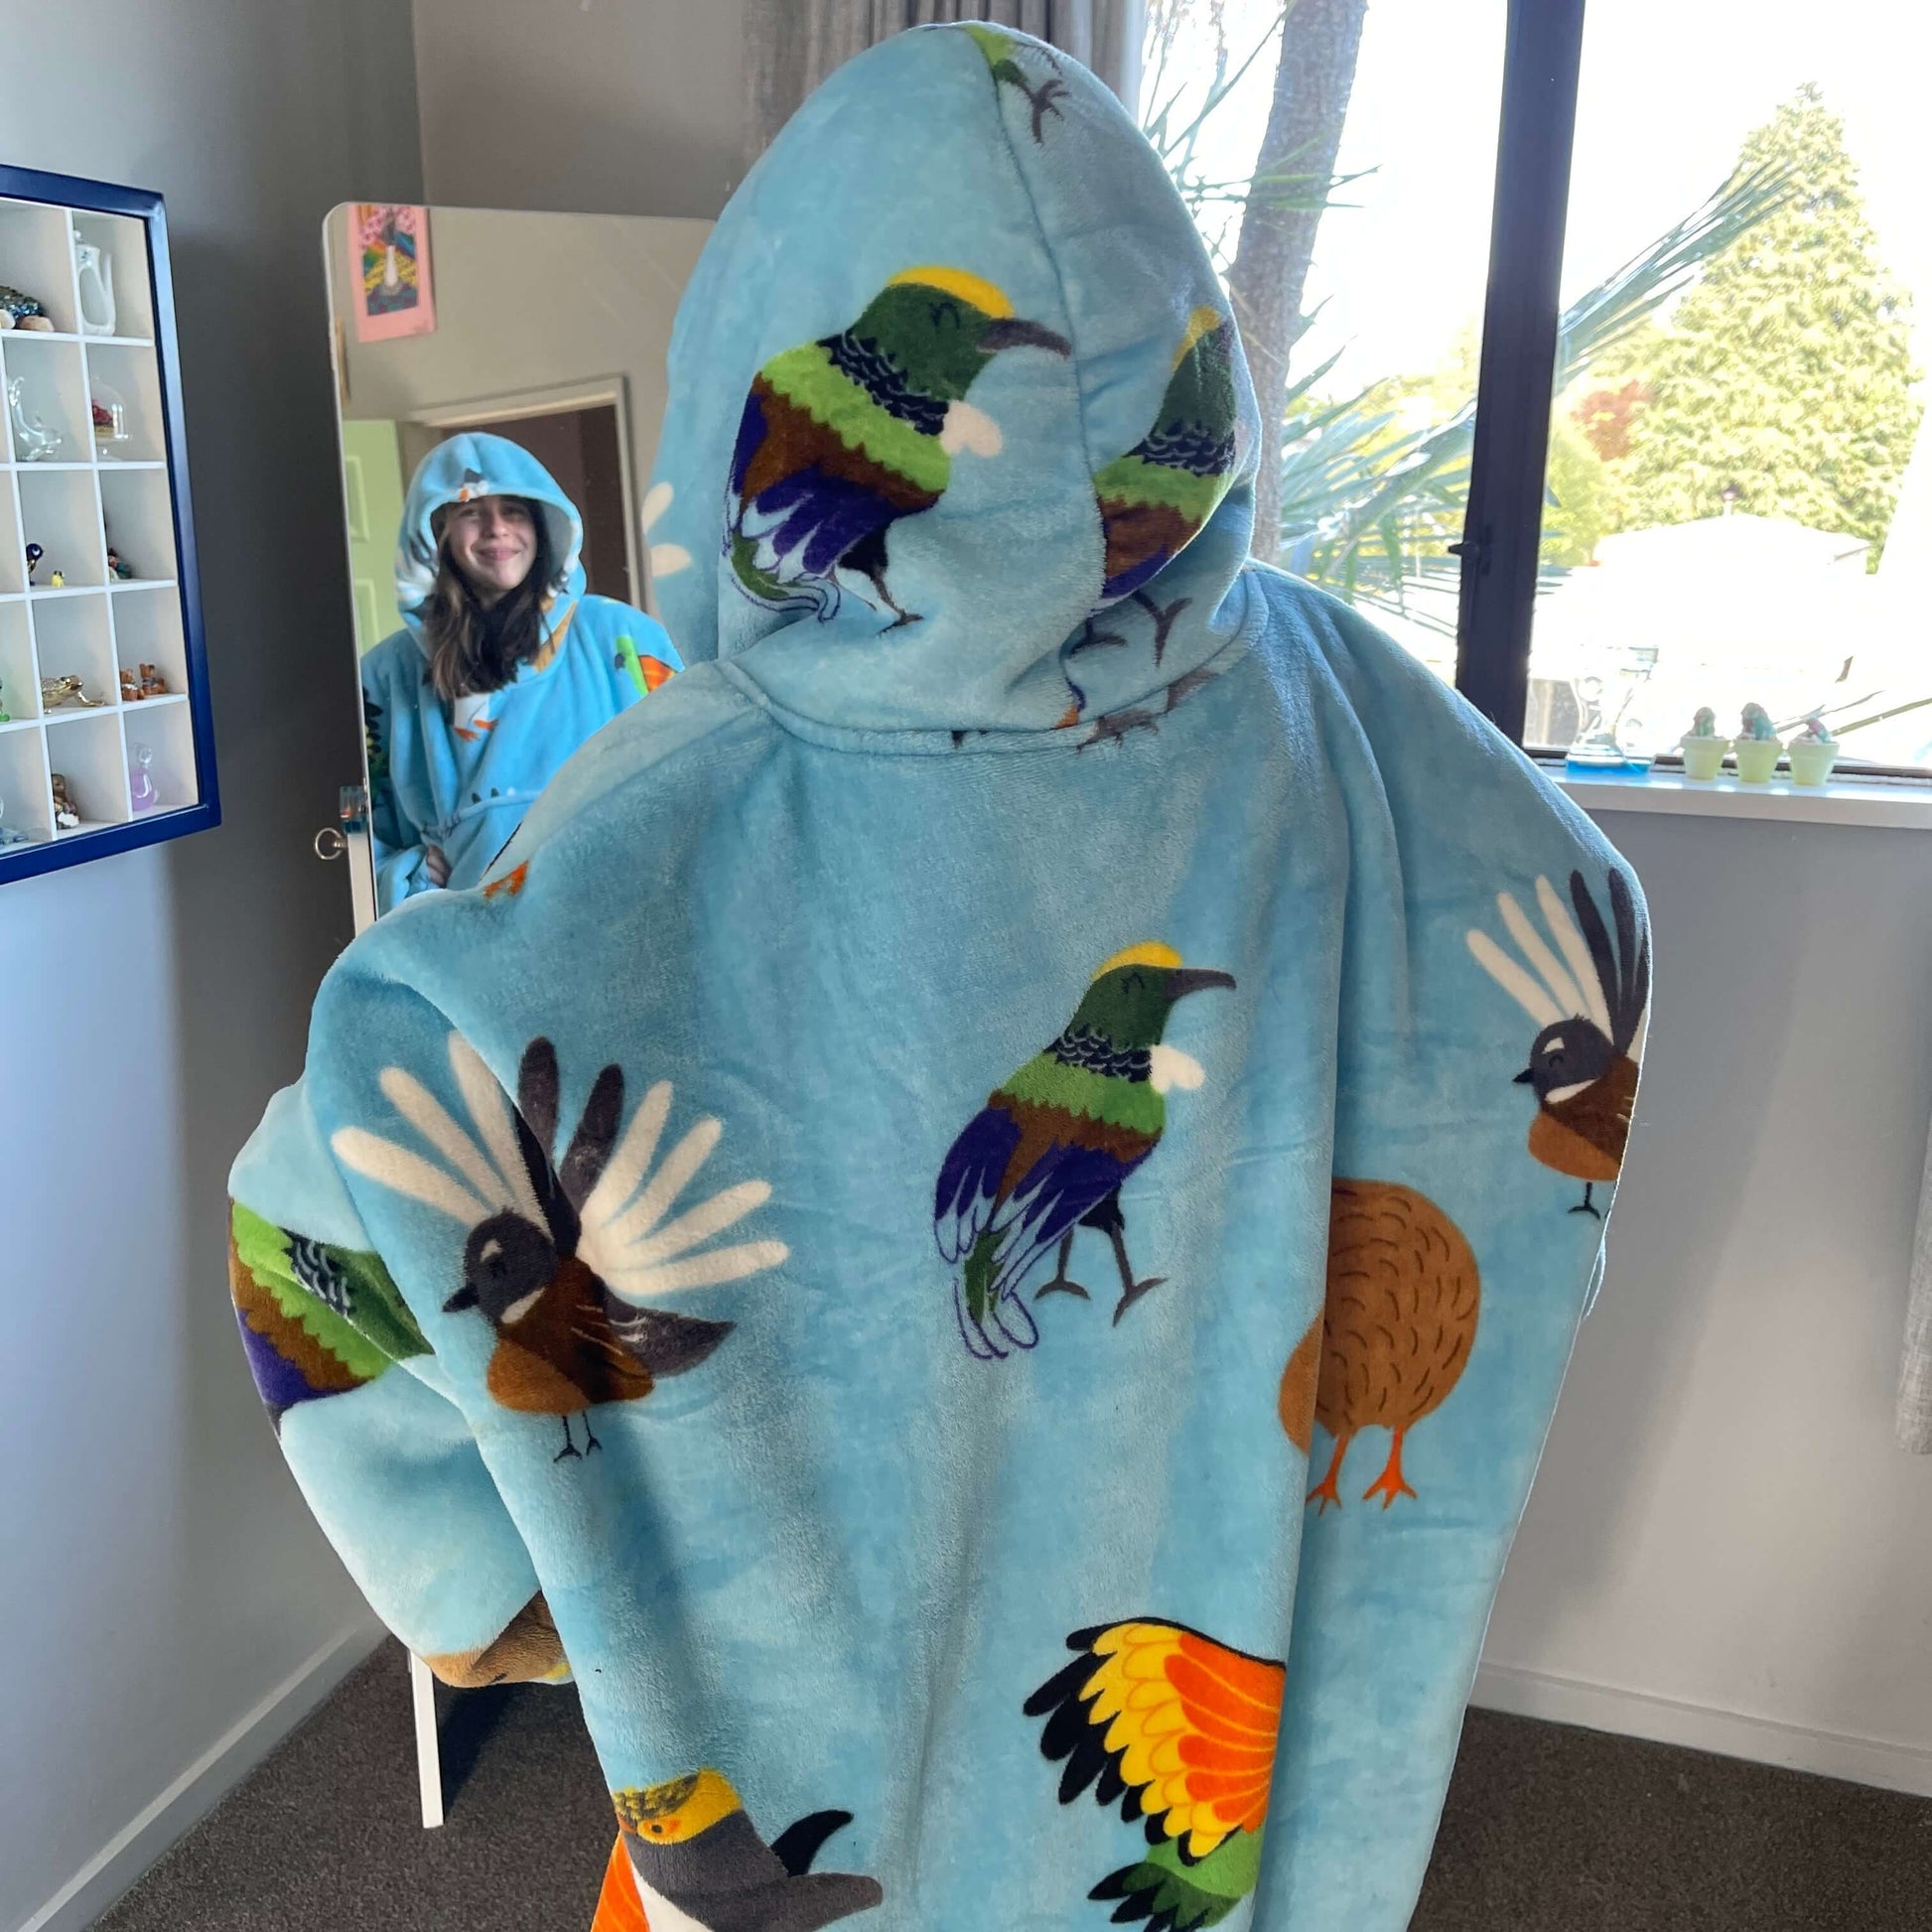 Girl looking at herself in a mirror wearing an oversized blue hoodie with New Zealand birds printed on it.